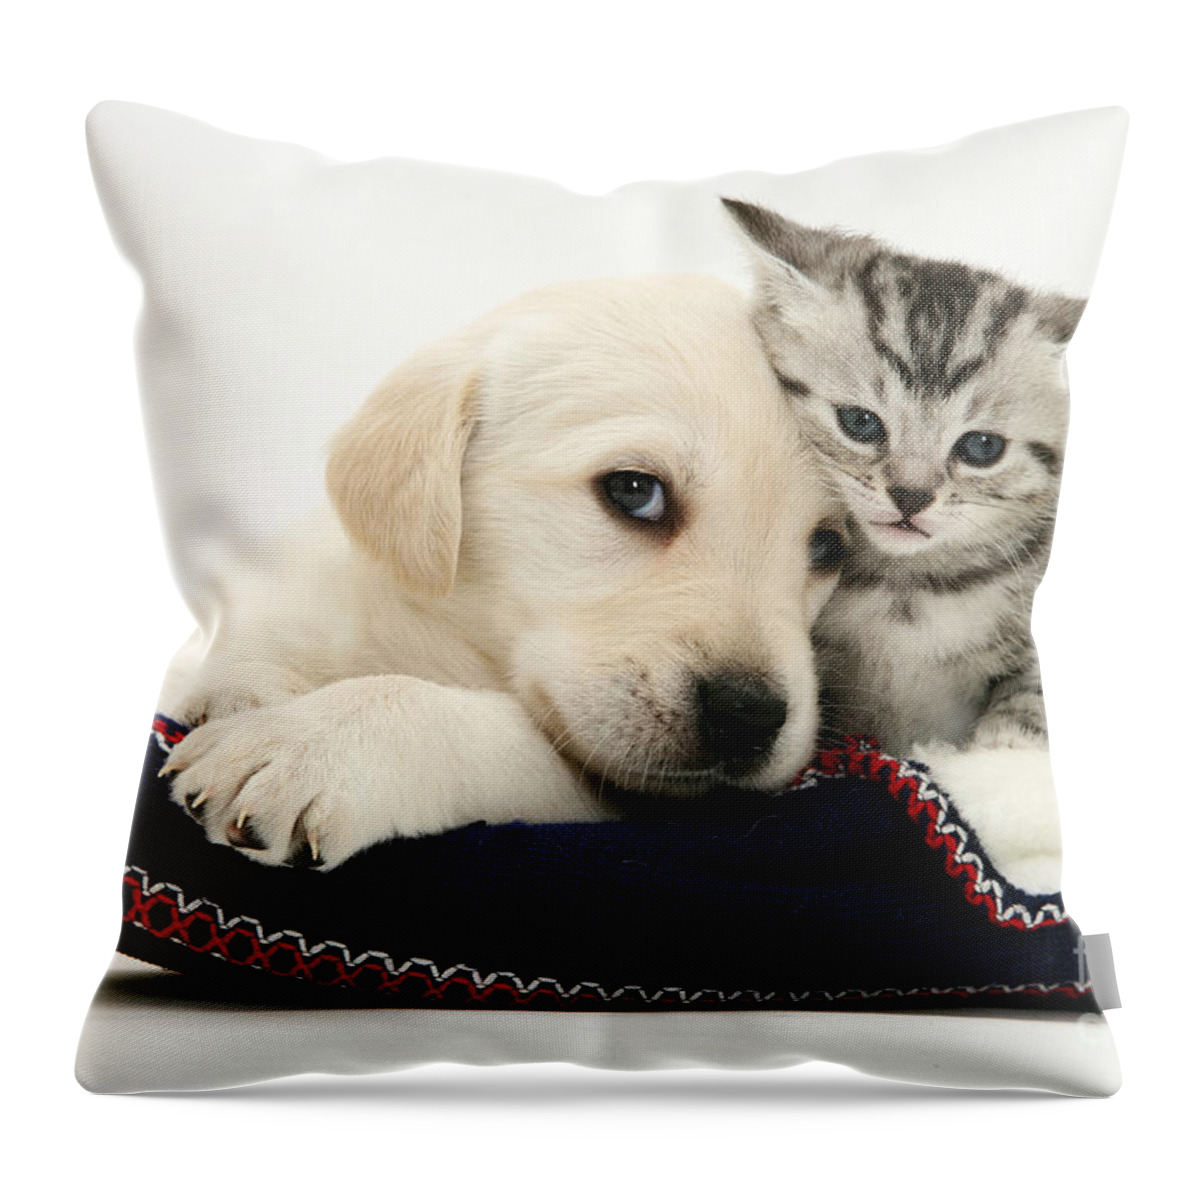 Goldador Throw Pillow featuring the photograph Puppy And Kitten #20 by Jane Burton